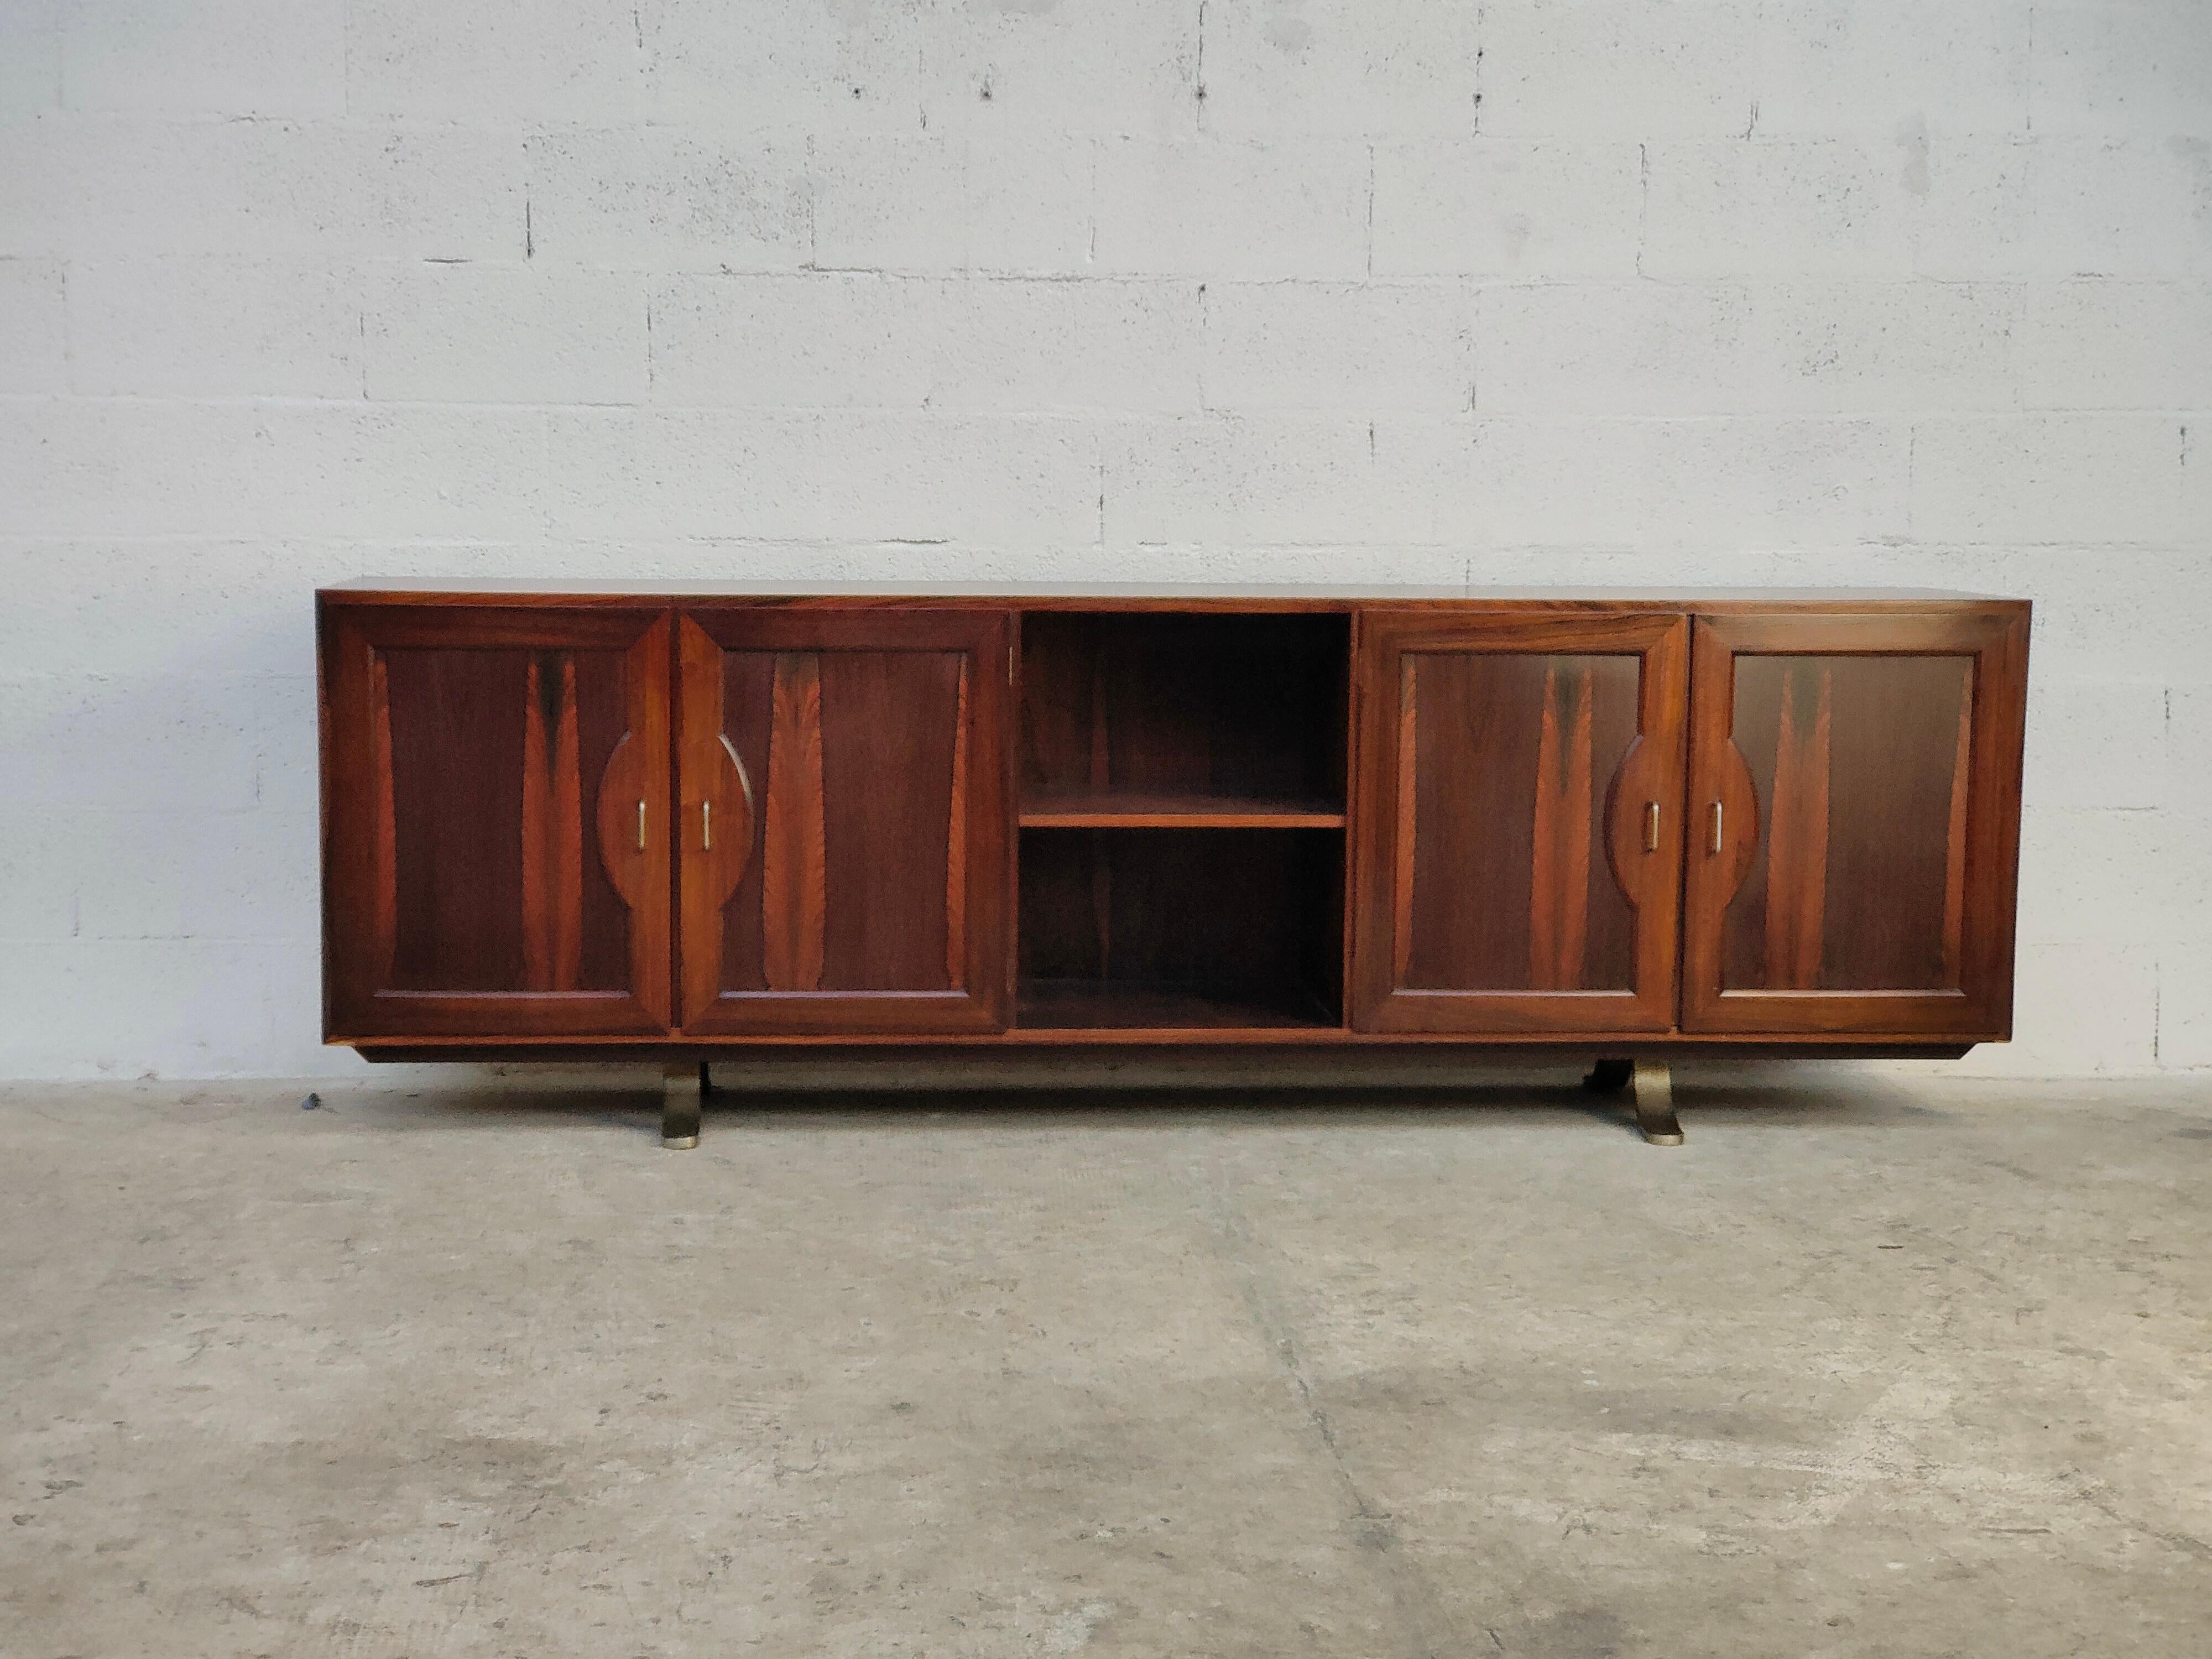 Wonderful wooden sideboard with metal feet diegned and produced in Italy in the 60s.
Found in a prestigious residence located in Veneto.
Of Fine quality and workmanship, it is in very good condition.
Dimensions: L 228 cm - D 46 cm - H 73.